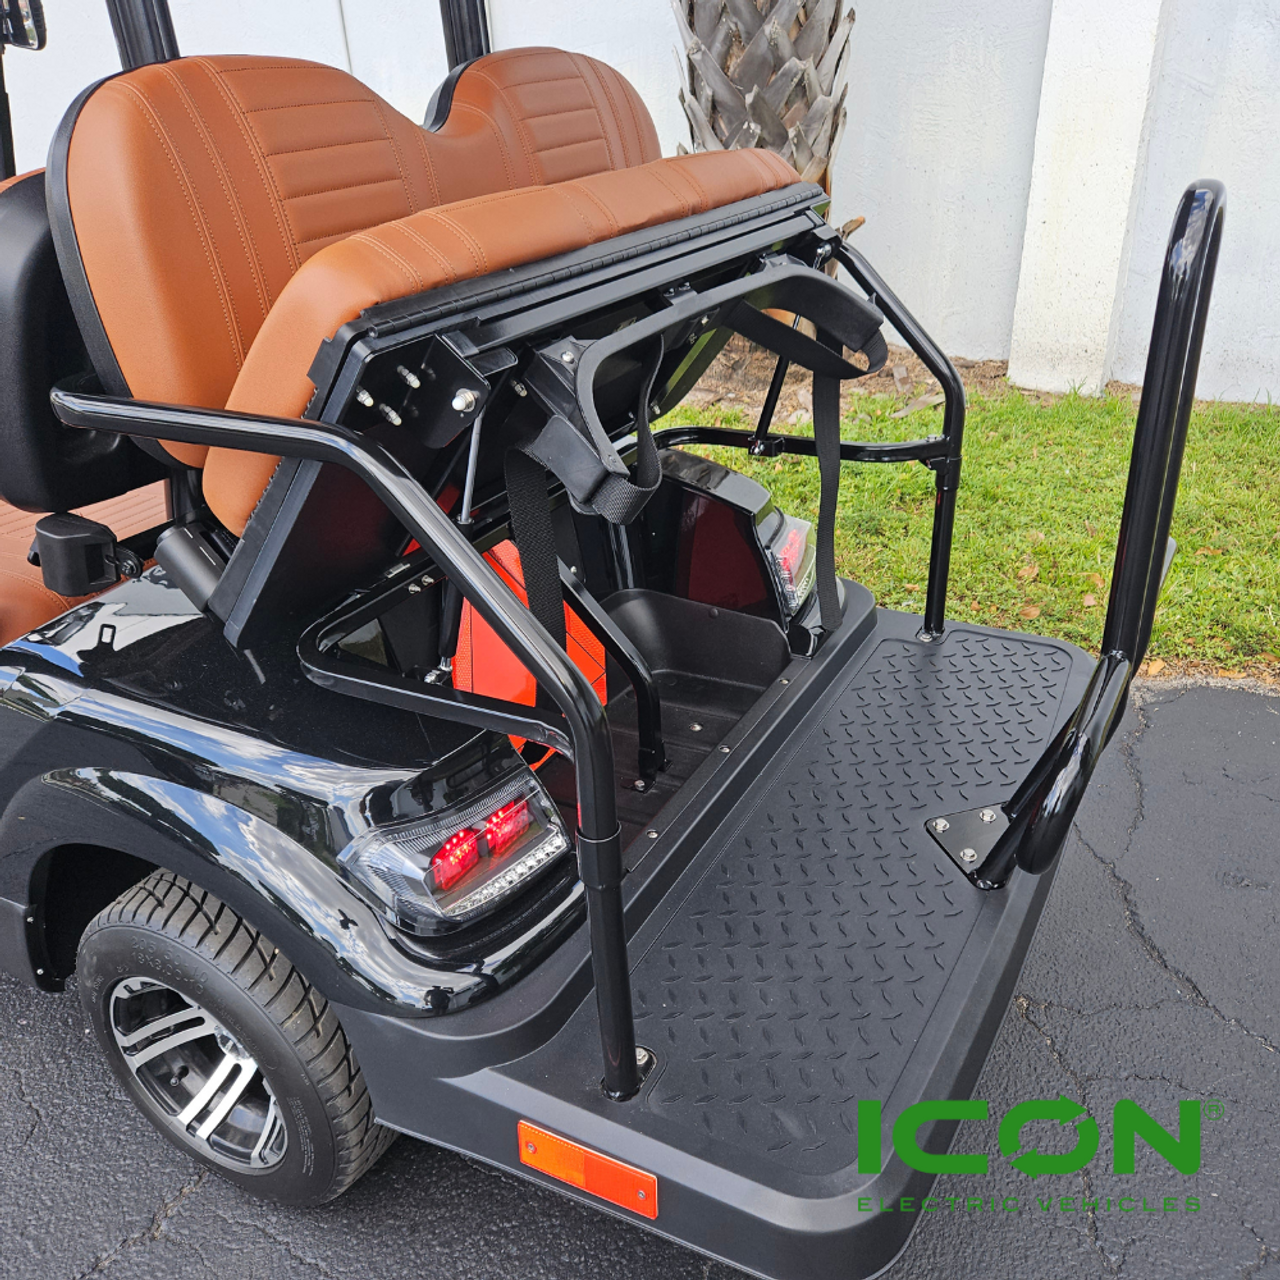 3-n-1 Golfer Rear Seat Kit for ICON Golf Carts (Seat Cushions and Footplate Not Included), ST-743-IC, 2.03.001.000218, 2.08.001.000016